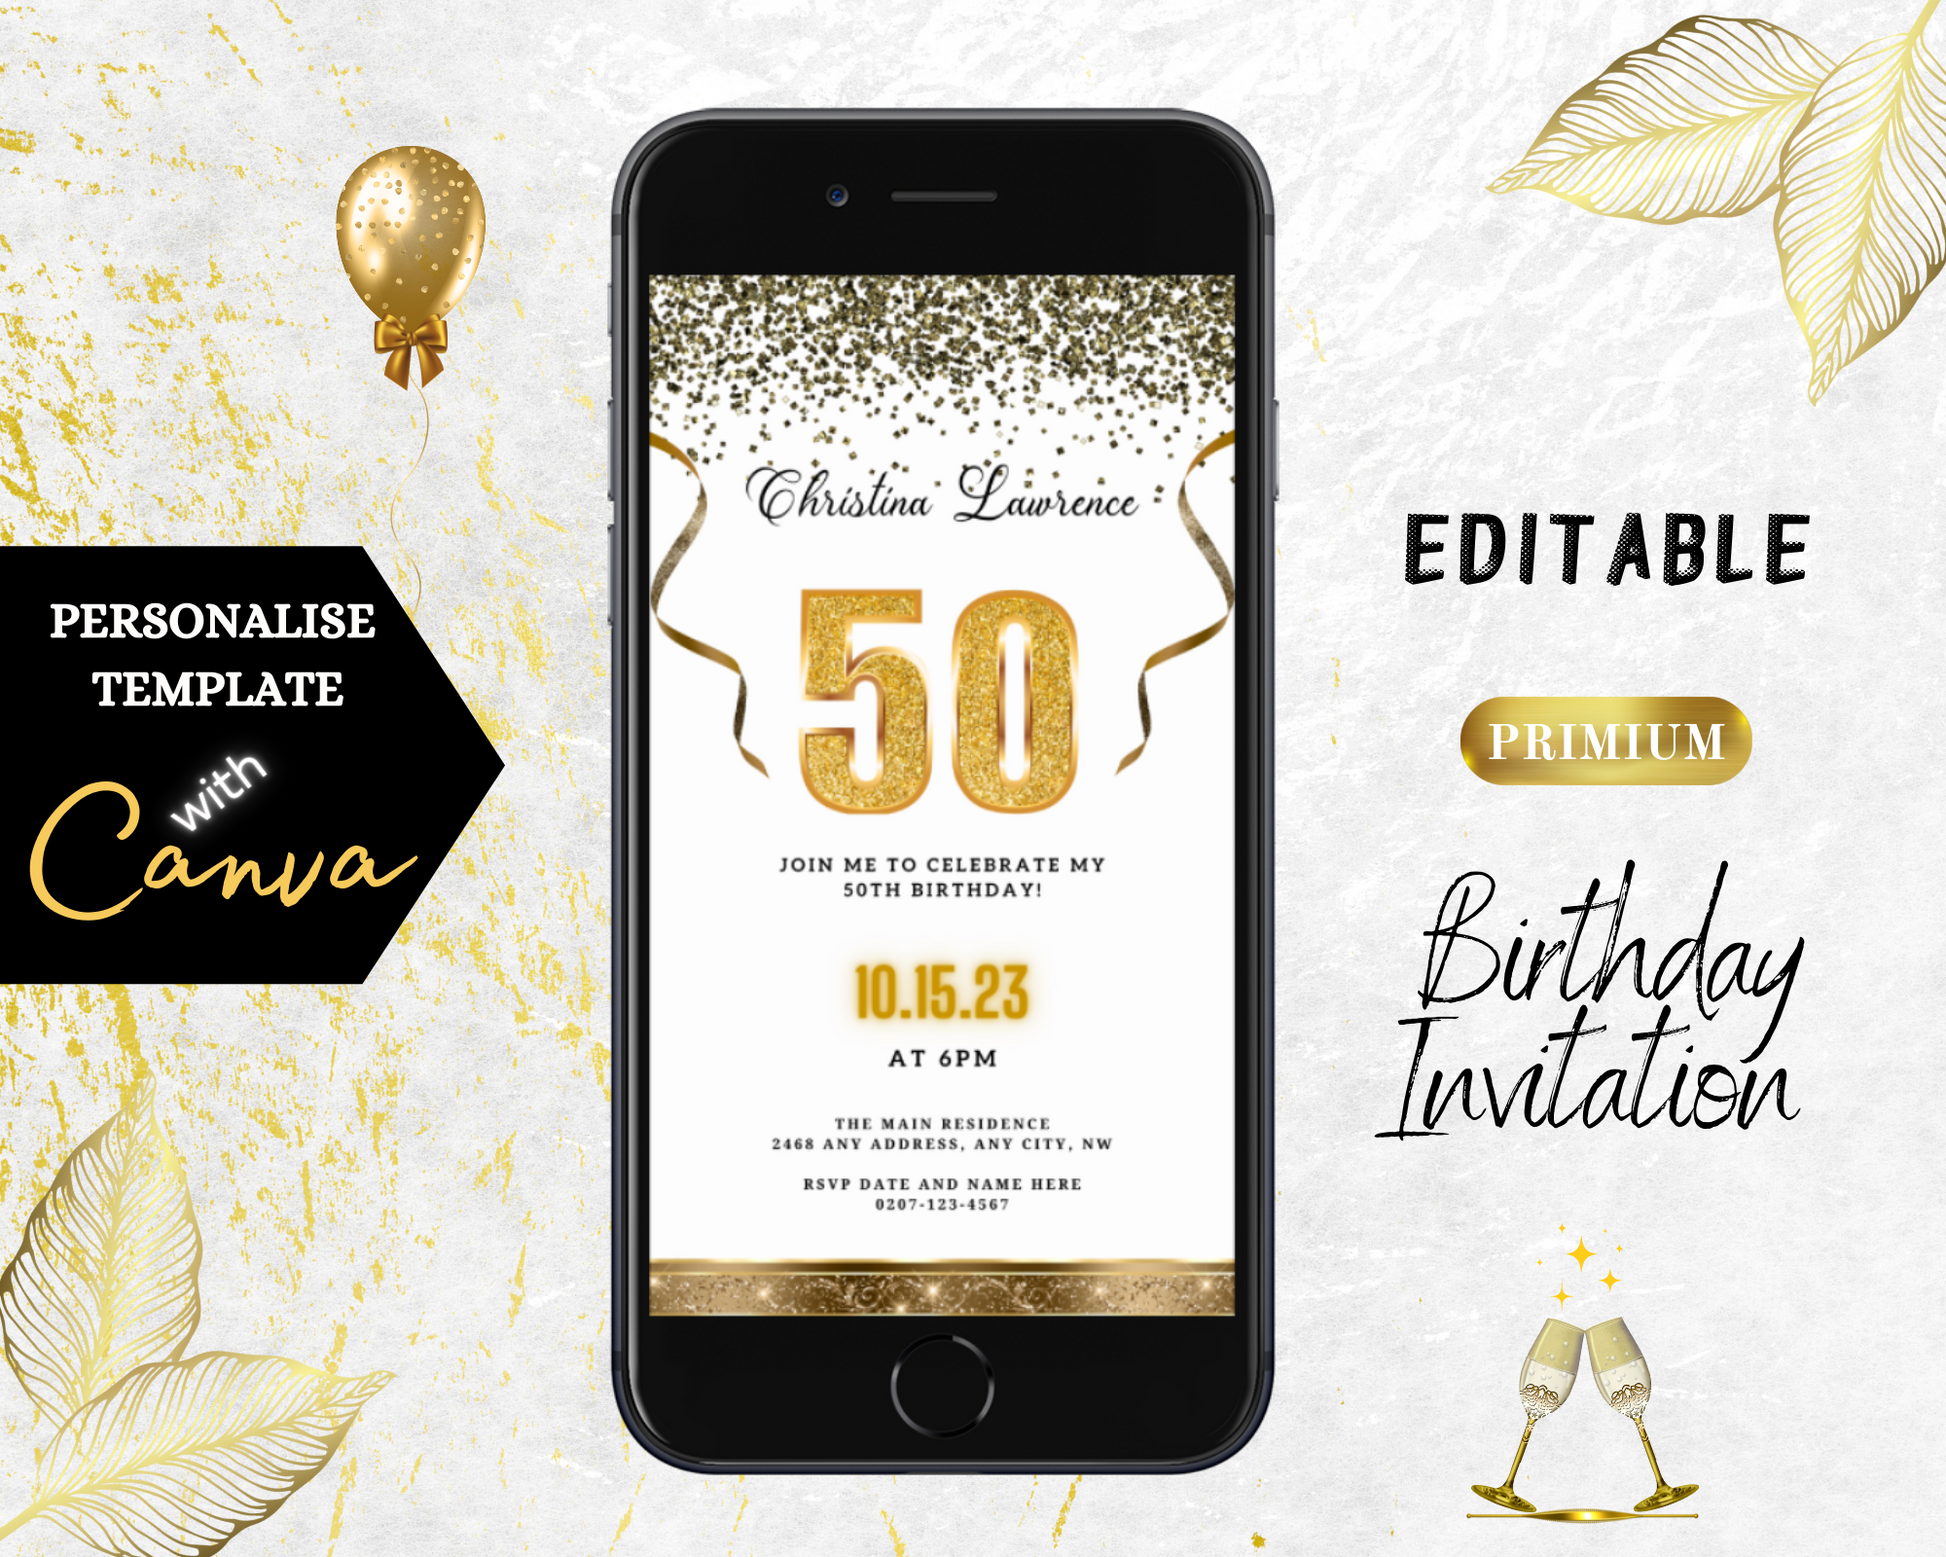 Customizable Digital White Gold Confetti 50th Birthday Evite displayed on a smartphone, showcasing editable text and design elements for a personalized invitation.